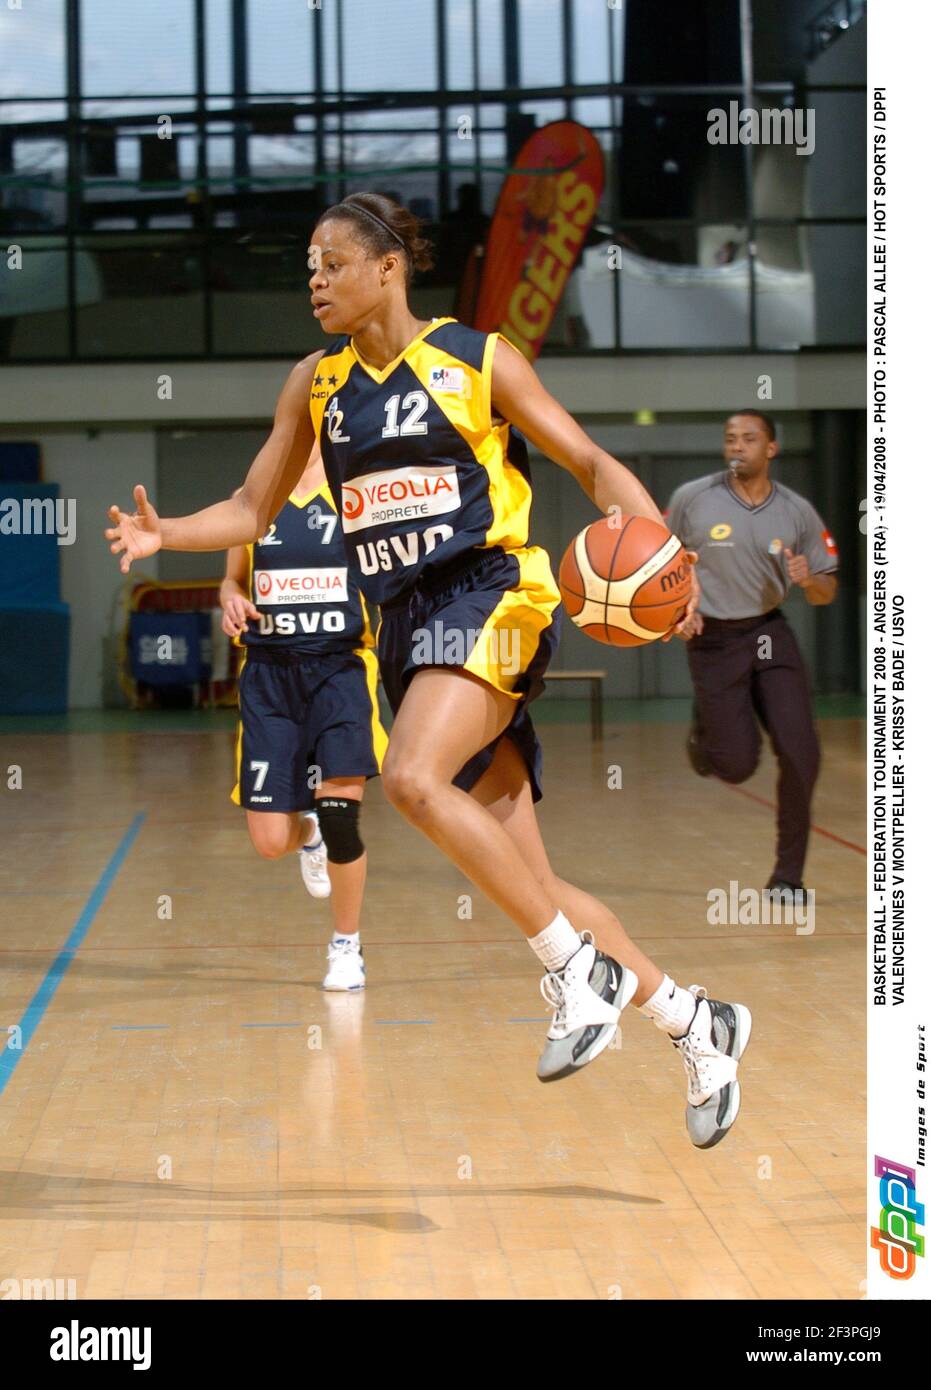 BASKETBALL - FEDERATION TOURNAMENT 2008 - ANGERS (FRA) - 19/04/2008 - PHOTO  : PASCAL ALLEE / HOT SPORTS / DPPI VALENCIENNES V MONTPELLIER - KRISSY BADE  / USVO Stock Photo - Alamy